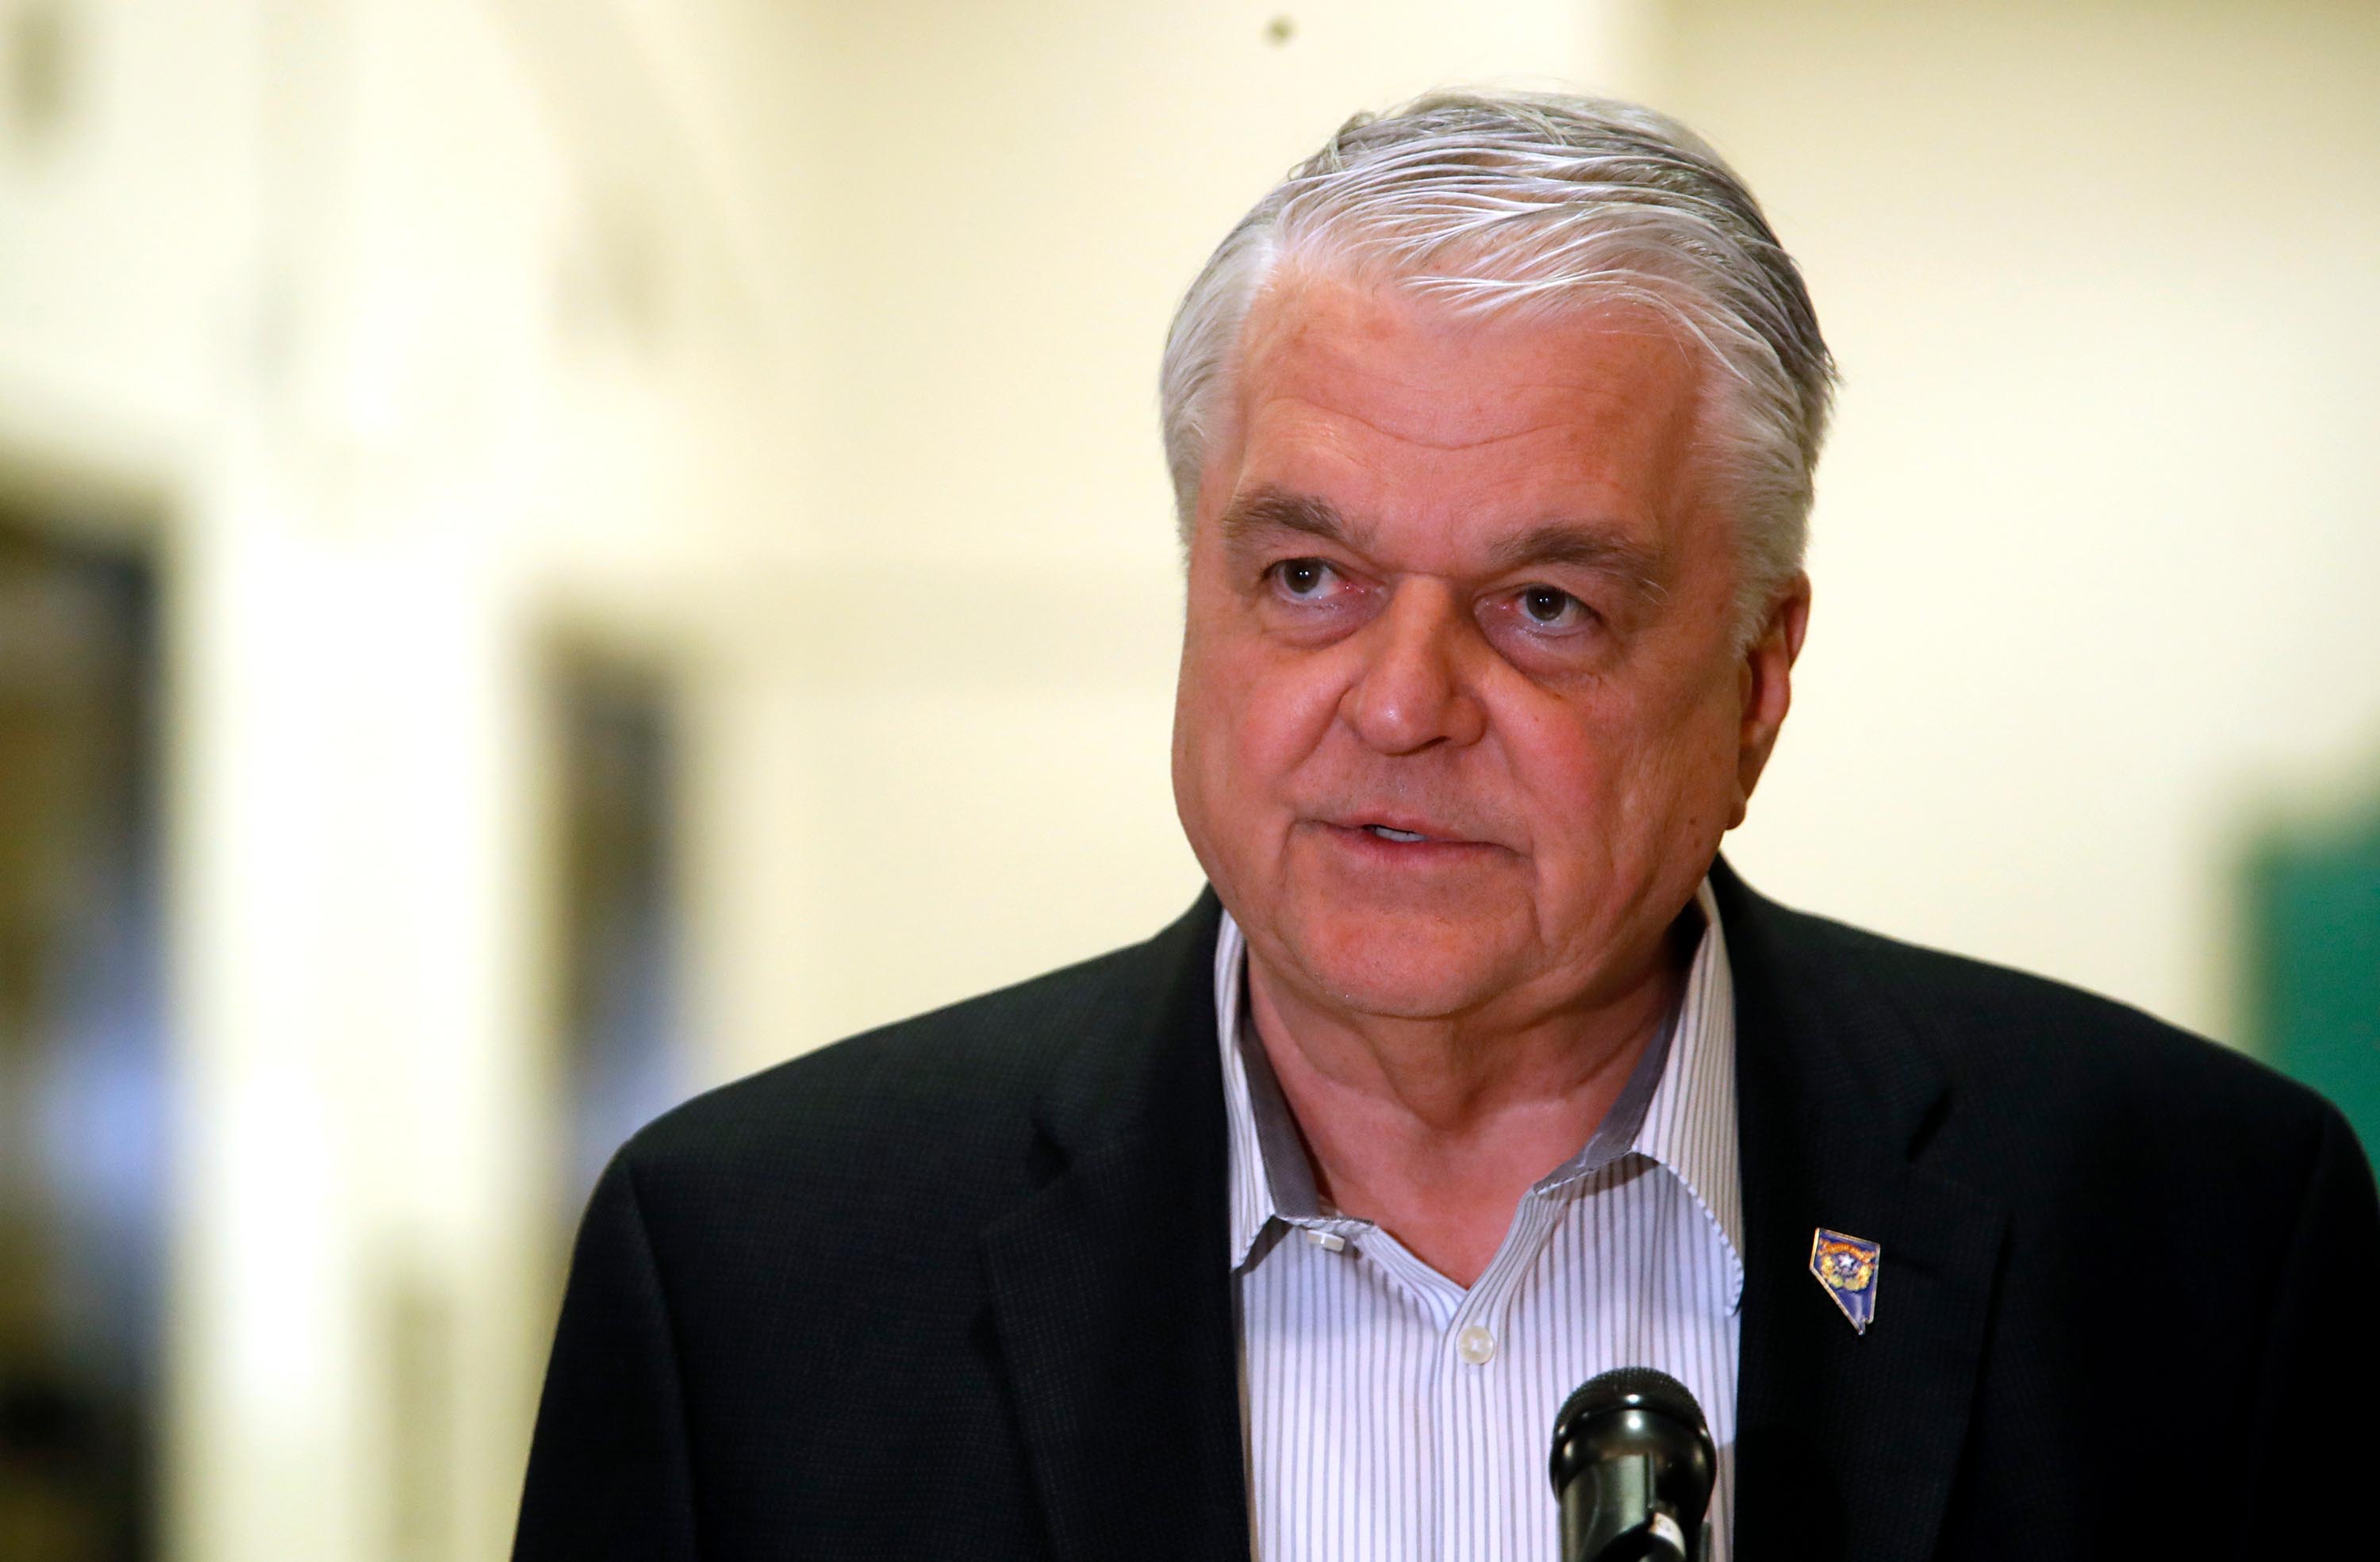 Nevada Gov. Steve Sisolak speaks during a news conference in Las Vegas on March 17.